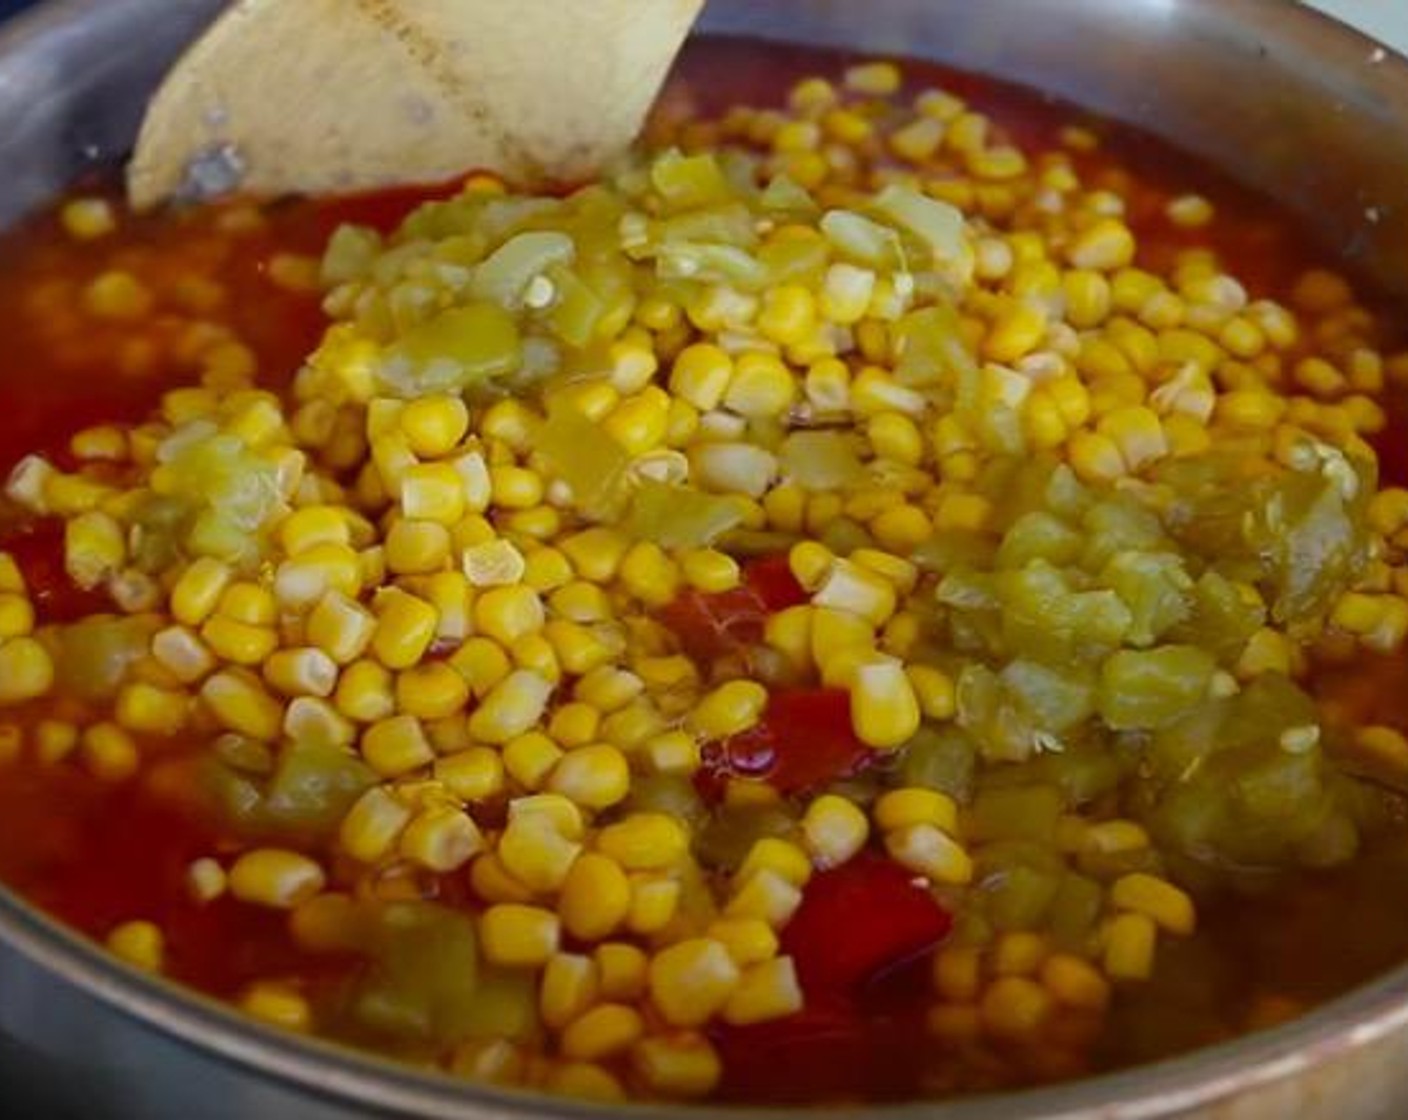 step 2 Add McCormick® Taco Seasoning Mix (1 pckg), Tomato Sauce (1 can), Diced Tomatoes (1 can), Sweet Corn (1 can), Mild Diced Green Chiles (1 can), and Beef Broth (2 cups). Mix everything together and bring to a boil.